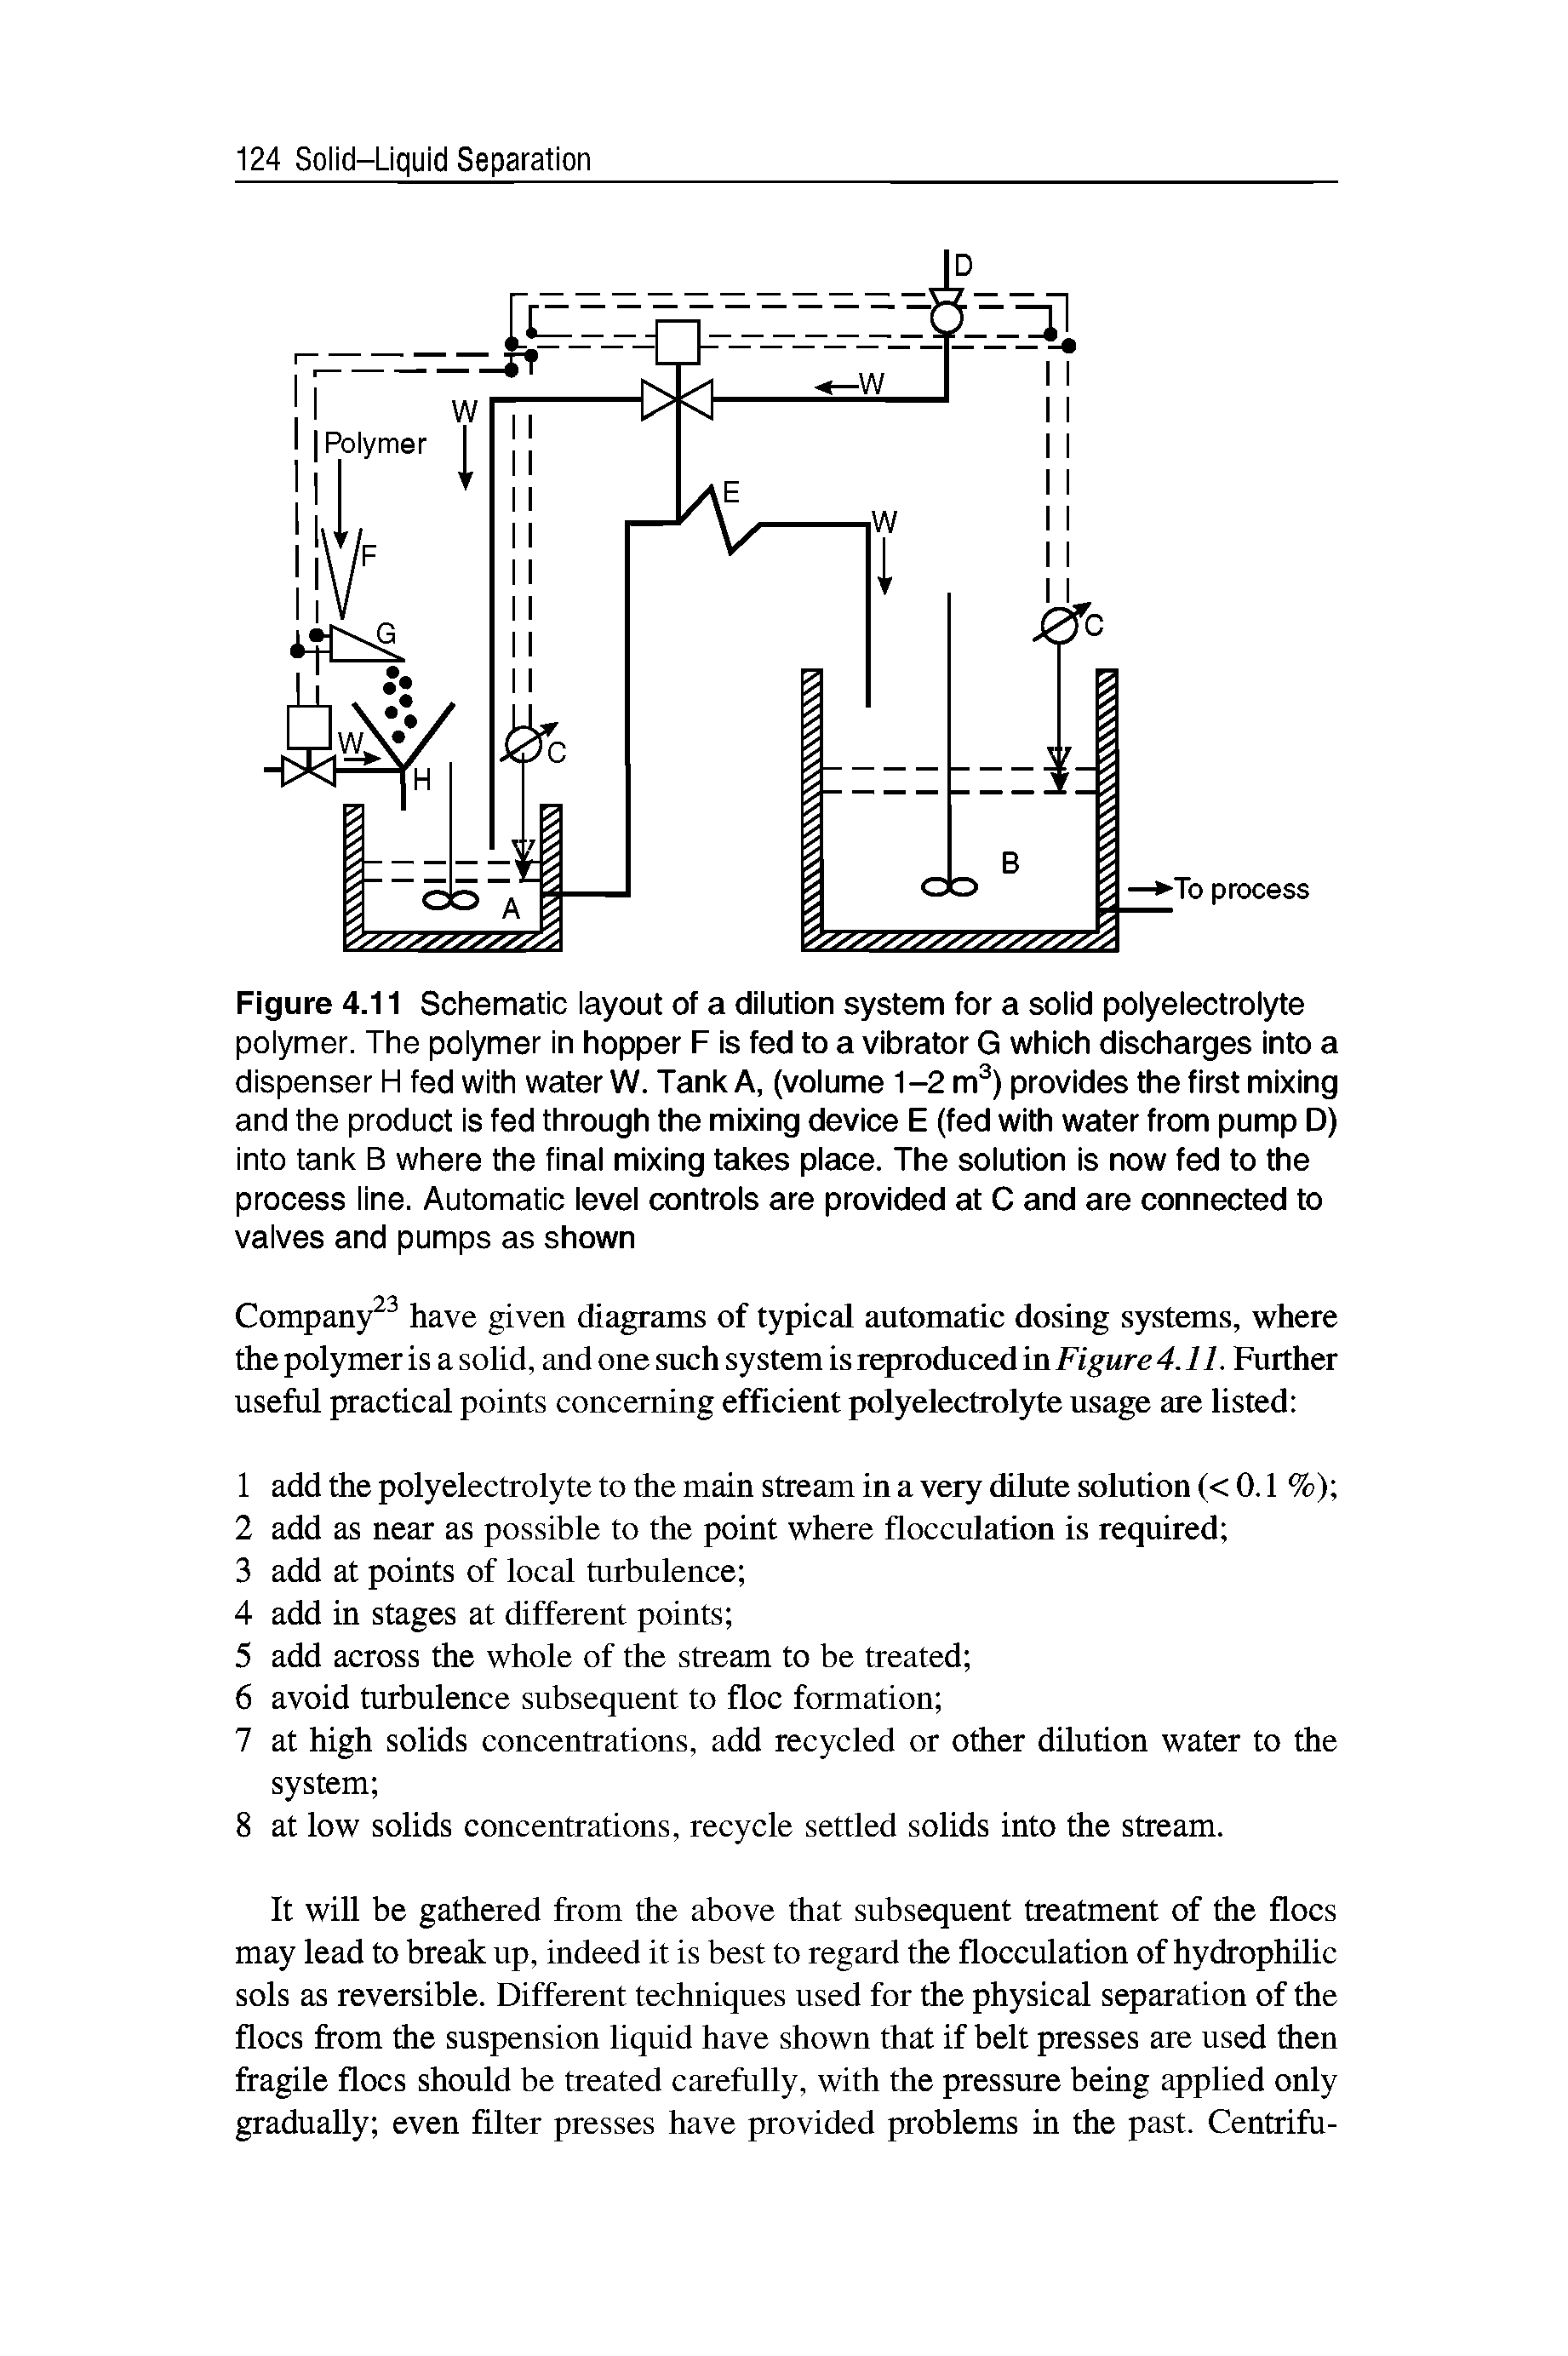 Figure 4.11 Schematic layout of a dilution system for a solid polyelectrolyte polymer. The polymer in hopper F is fed to a vibrator G which discharges into a dispenser H fed with water W. Tank A, (volume 1-2 m ) provides the first mixing and the product is fed through the mixing device E (fed with water from pump D) into tank B where the final mixing takes place. The solution is now fed to the process line. Automatic level controls are provided at C and are connected to valves and pumps as shown...